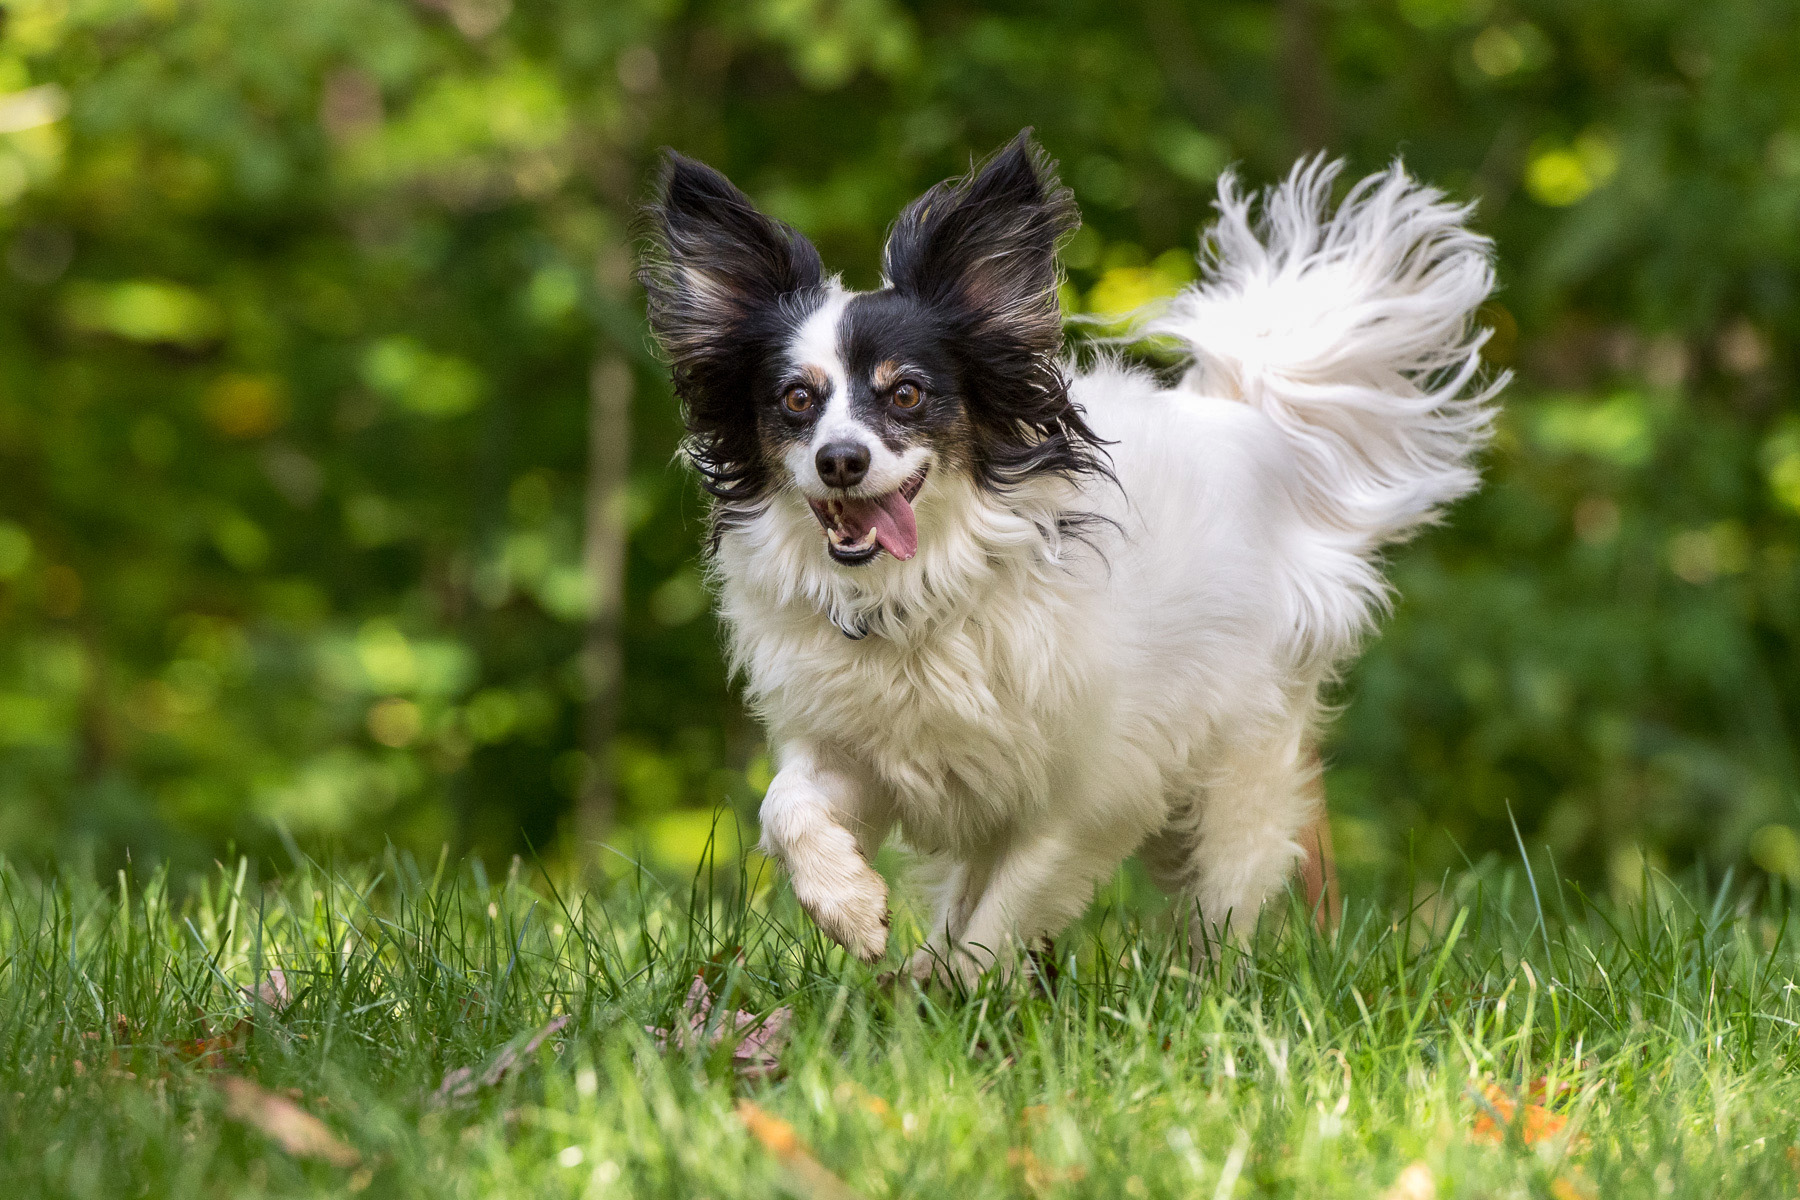 A Papillion mix runs through his yard with his tail up and tongue hanging out.